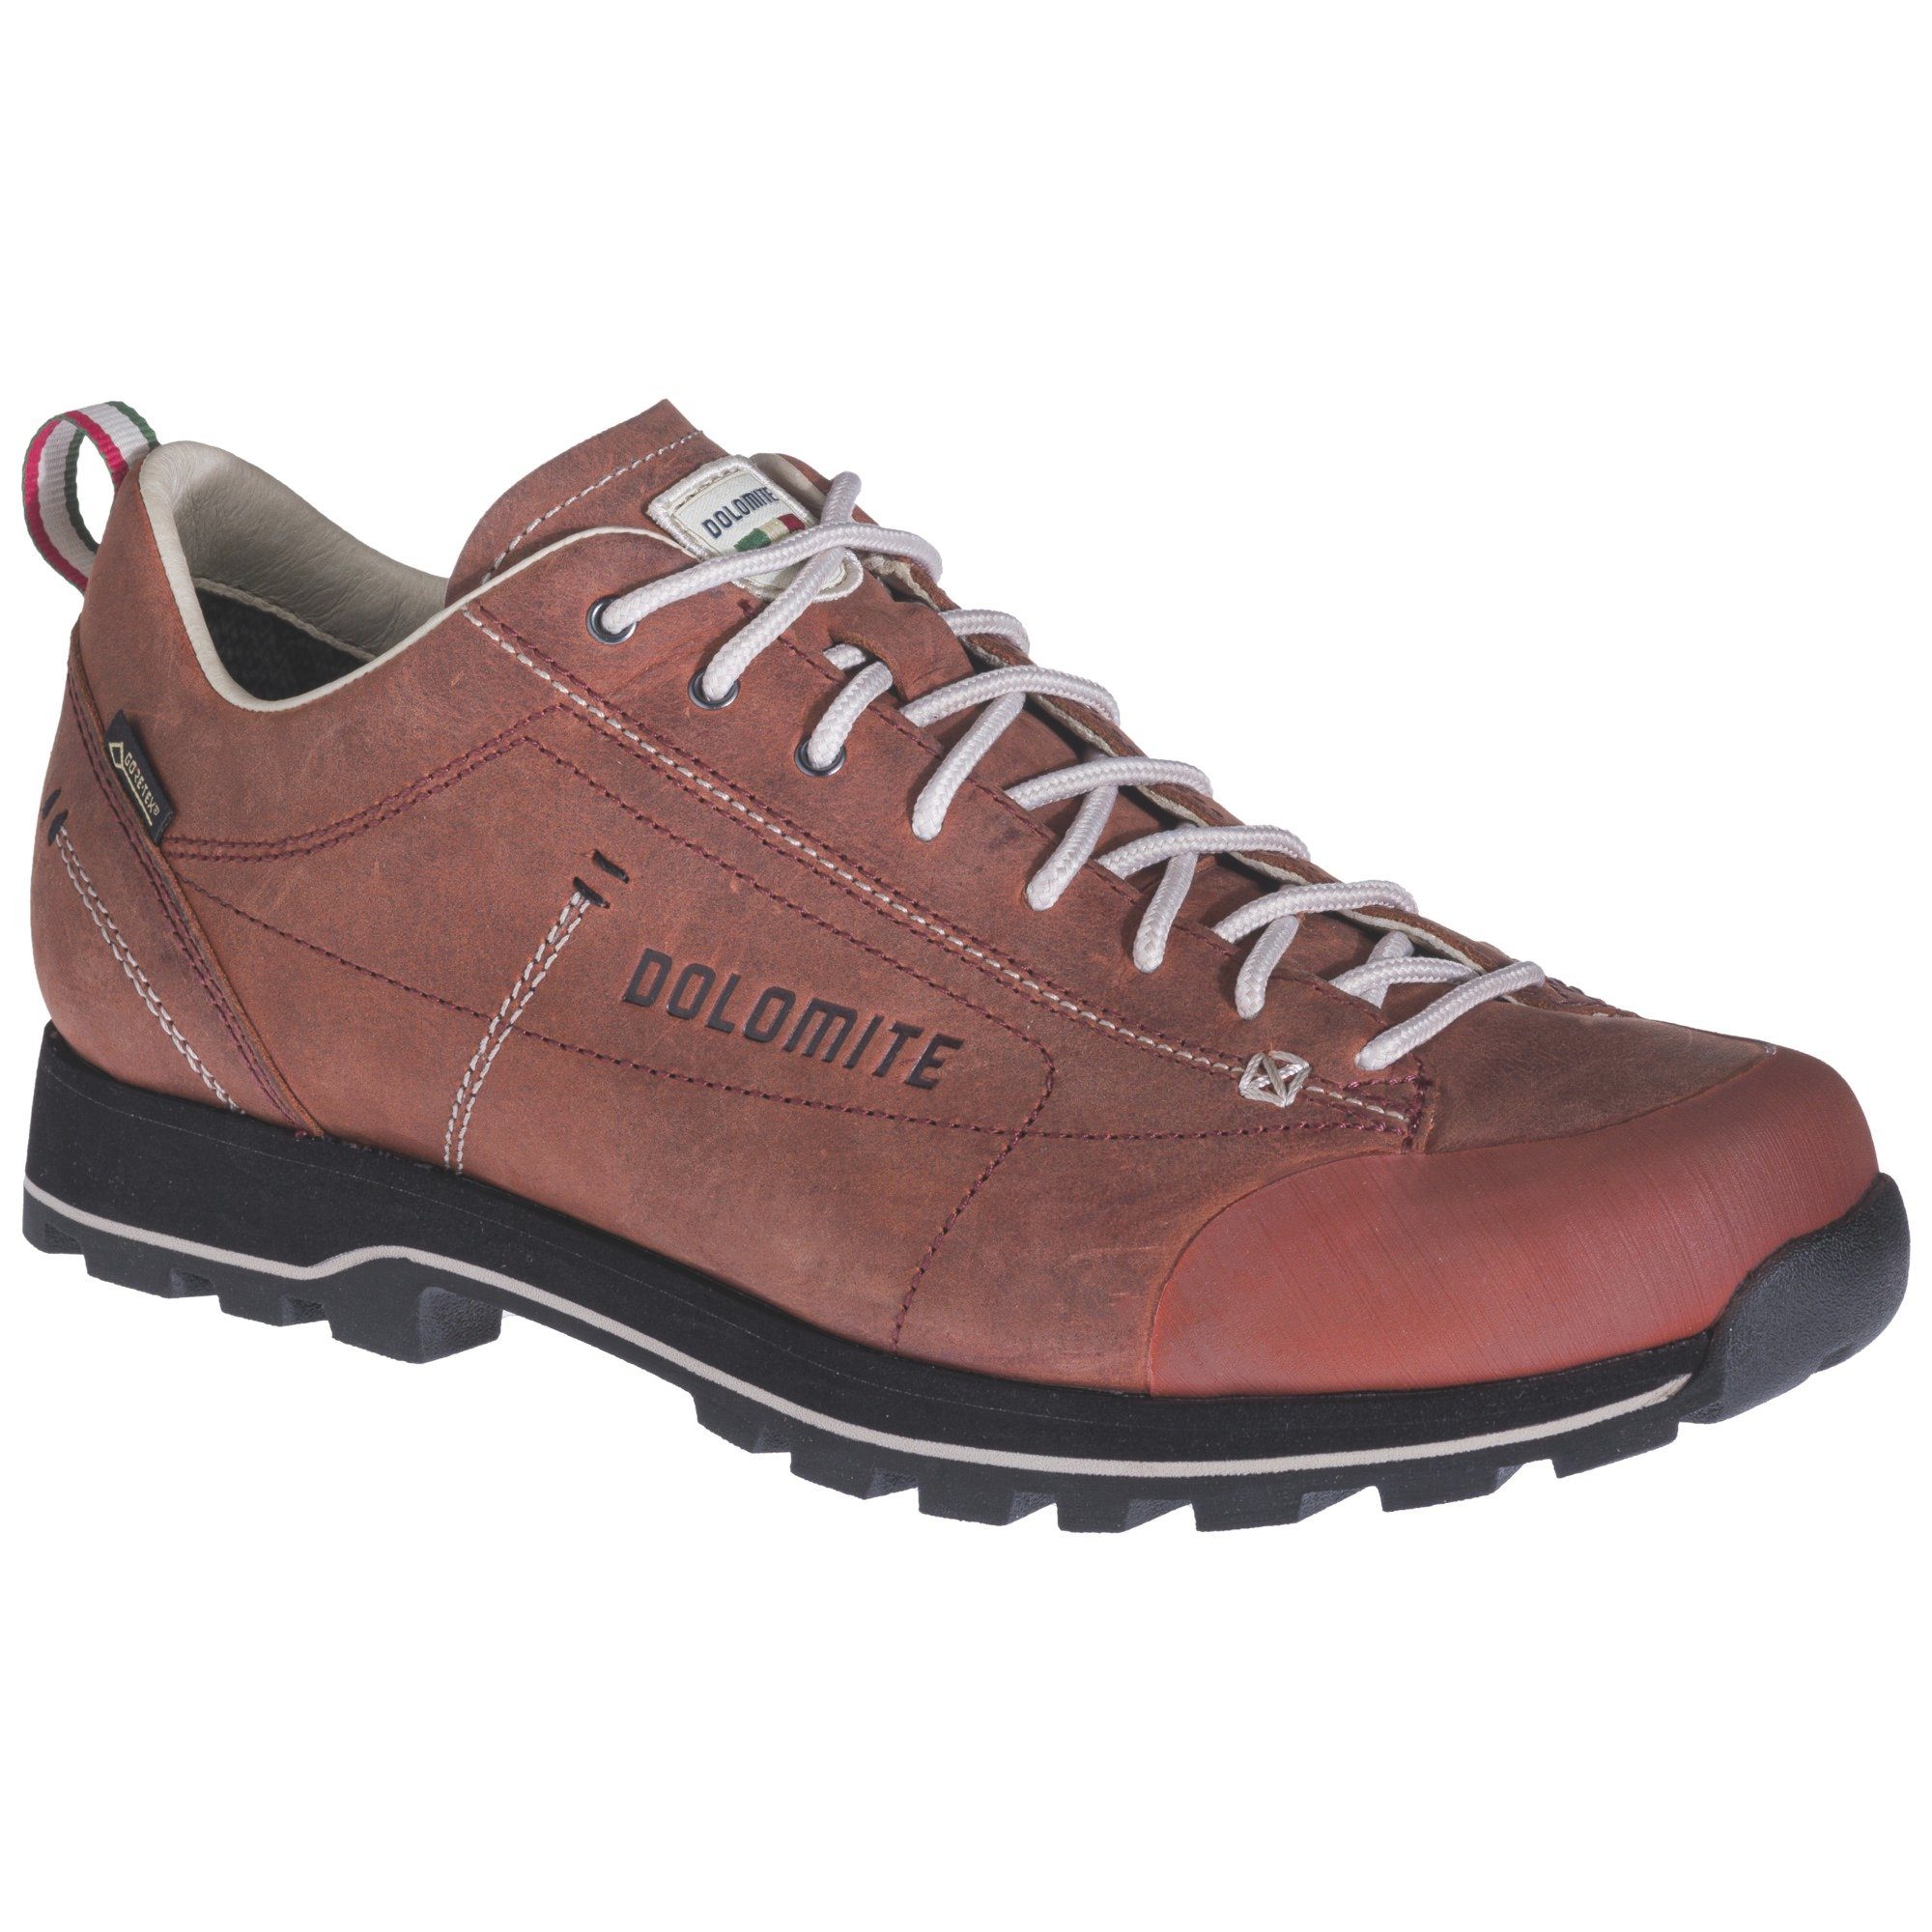 Outdoorschuh Dolomite Shoe Fg Ginger Cinquantaquattro DOL Dolomite Gt Red Low